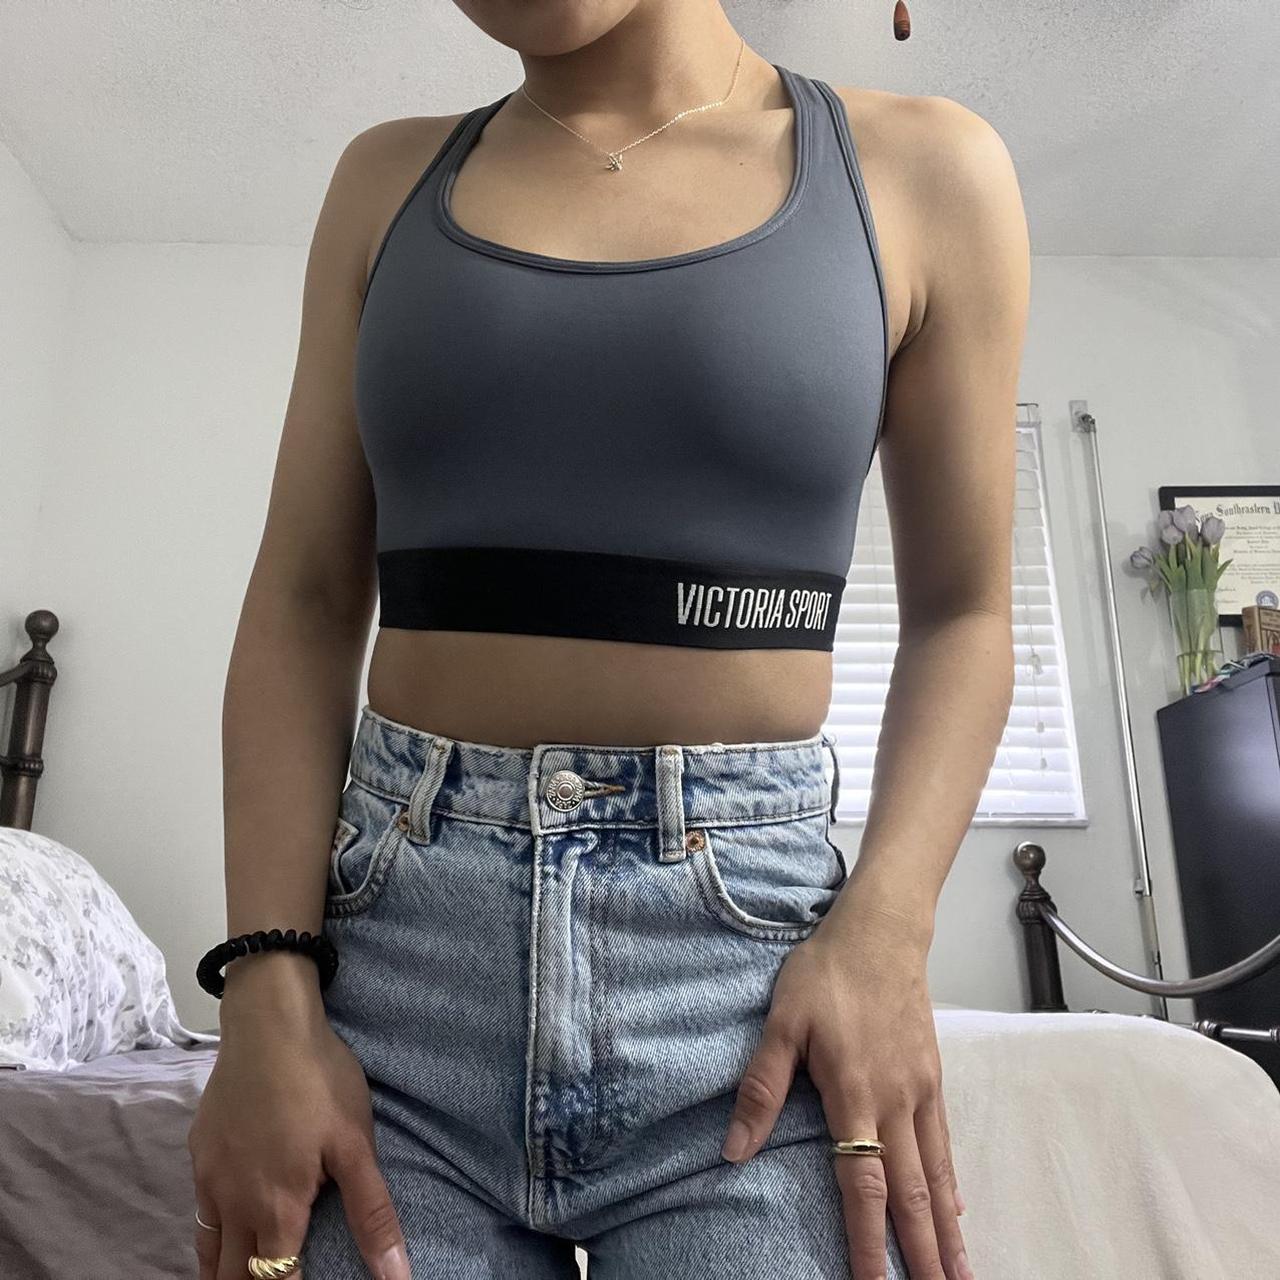 Grey Victoria Sport Sports bra Great for a workout - Depop